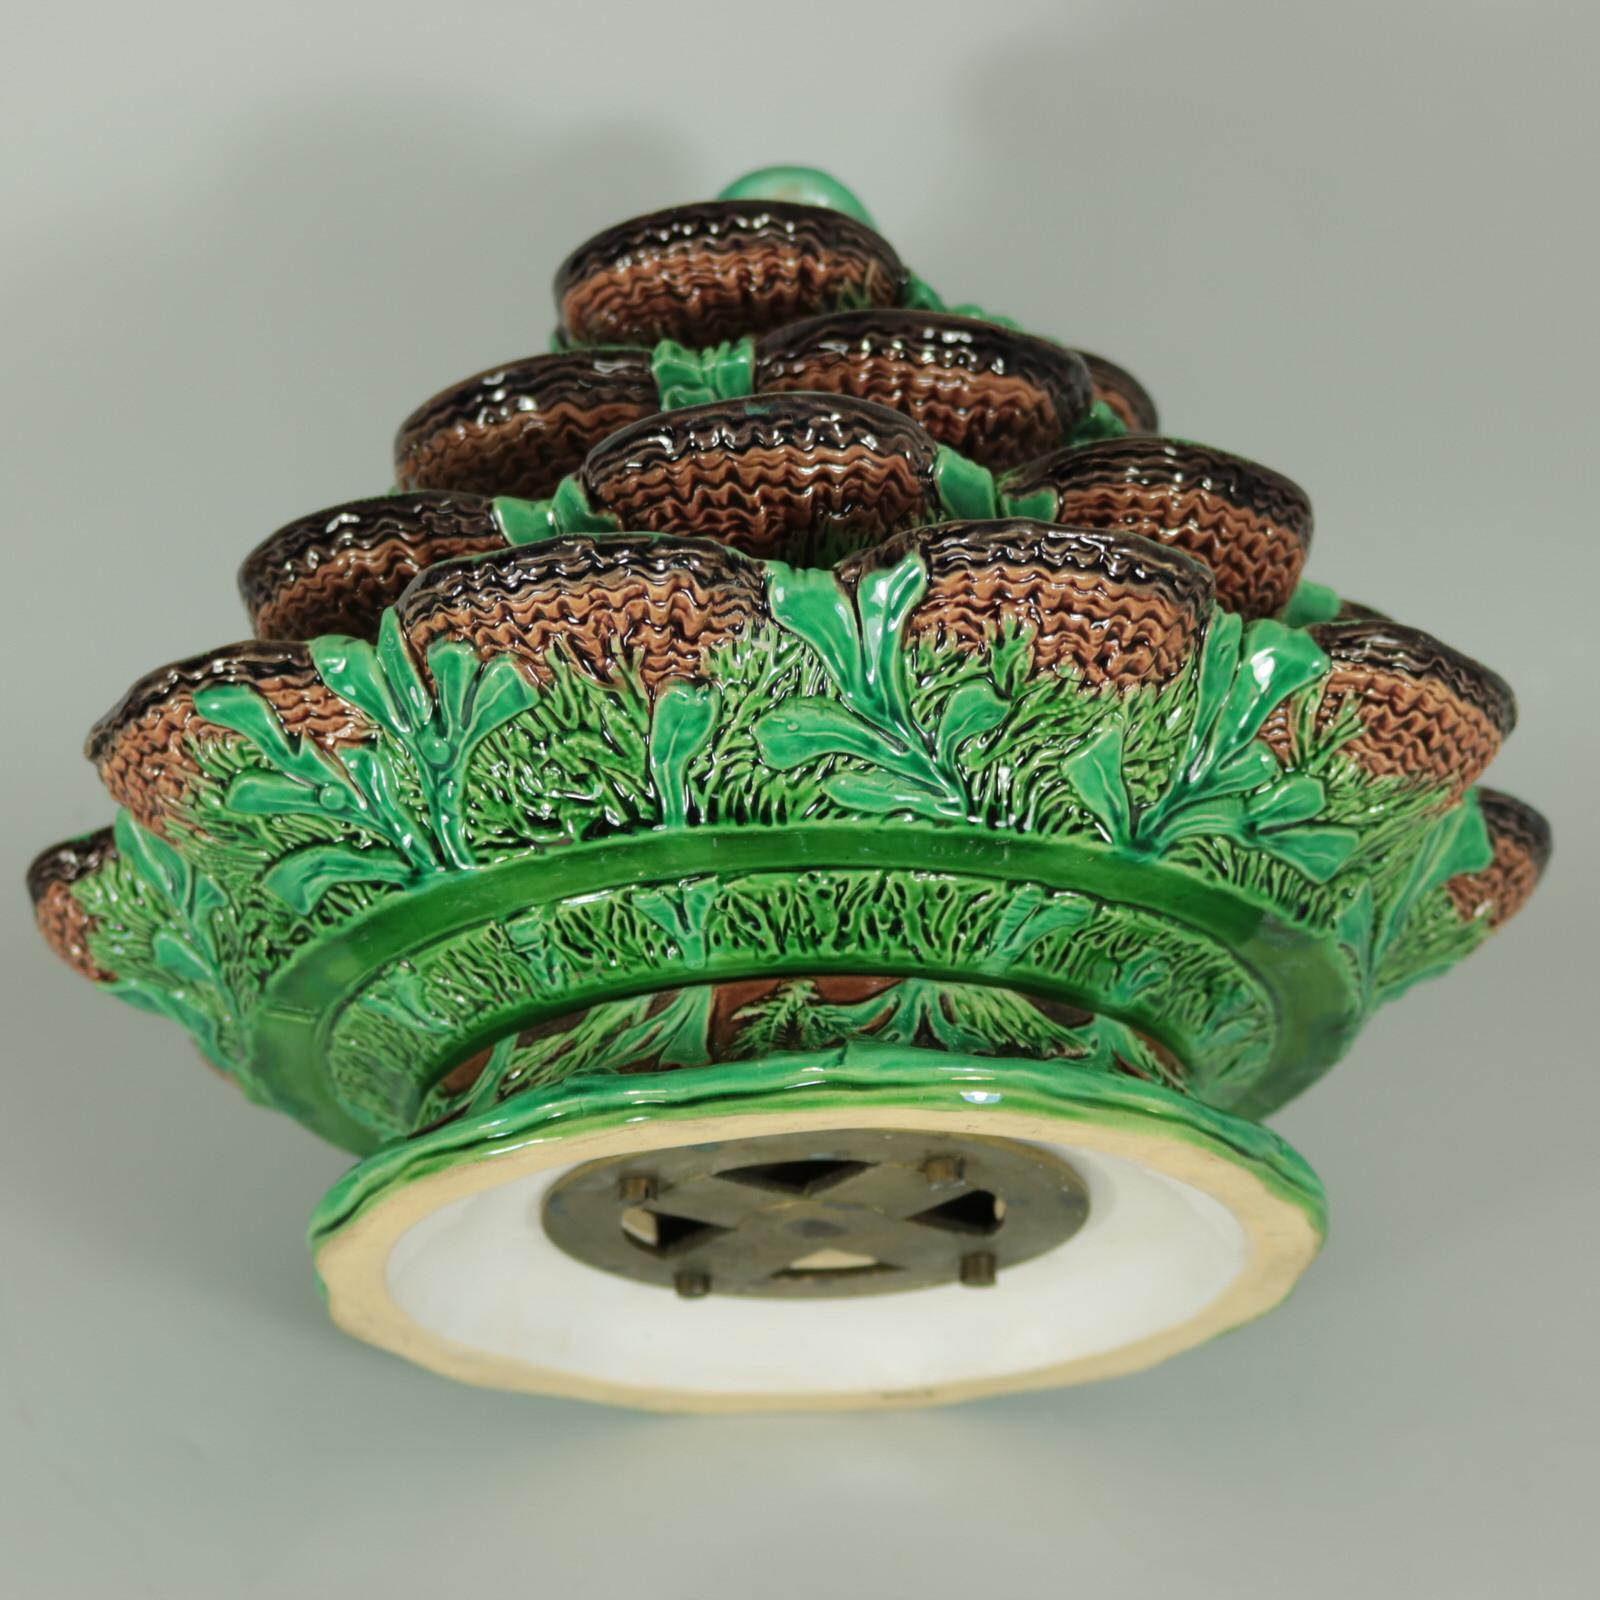 British Minton Majolica Four Tiered Oyster Stand